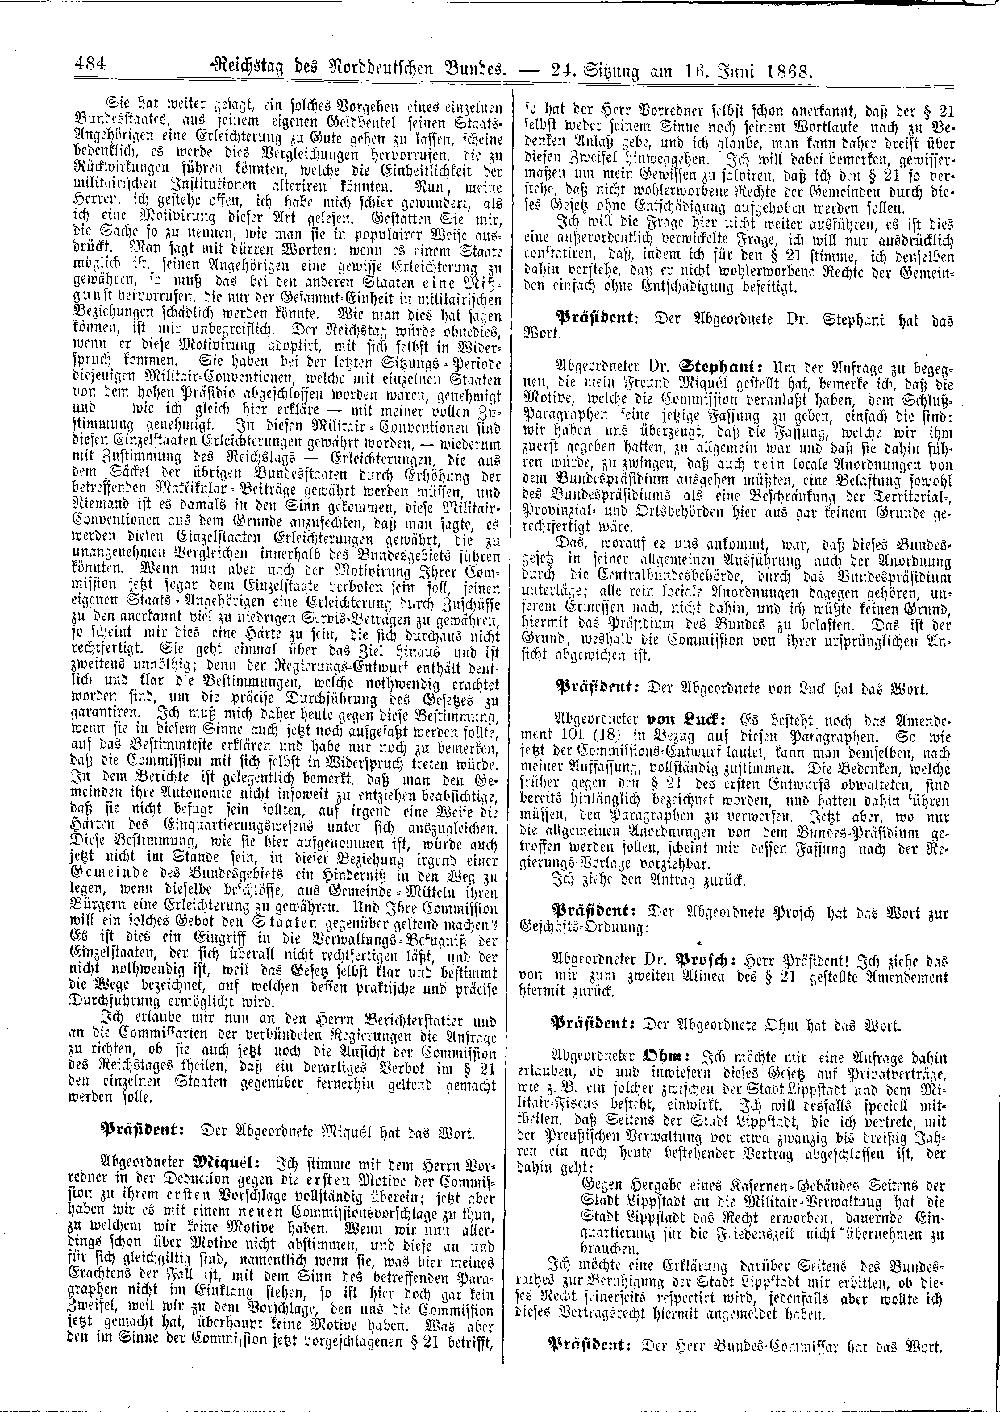 Scan of page 484